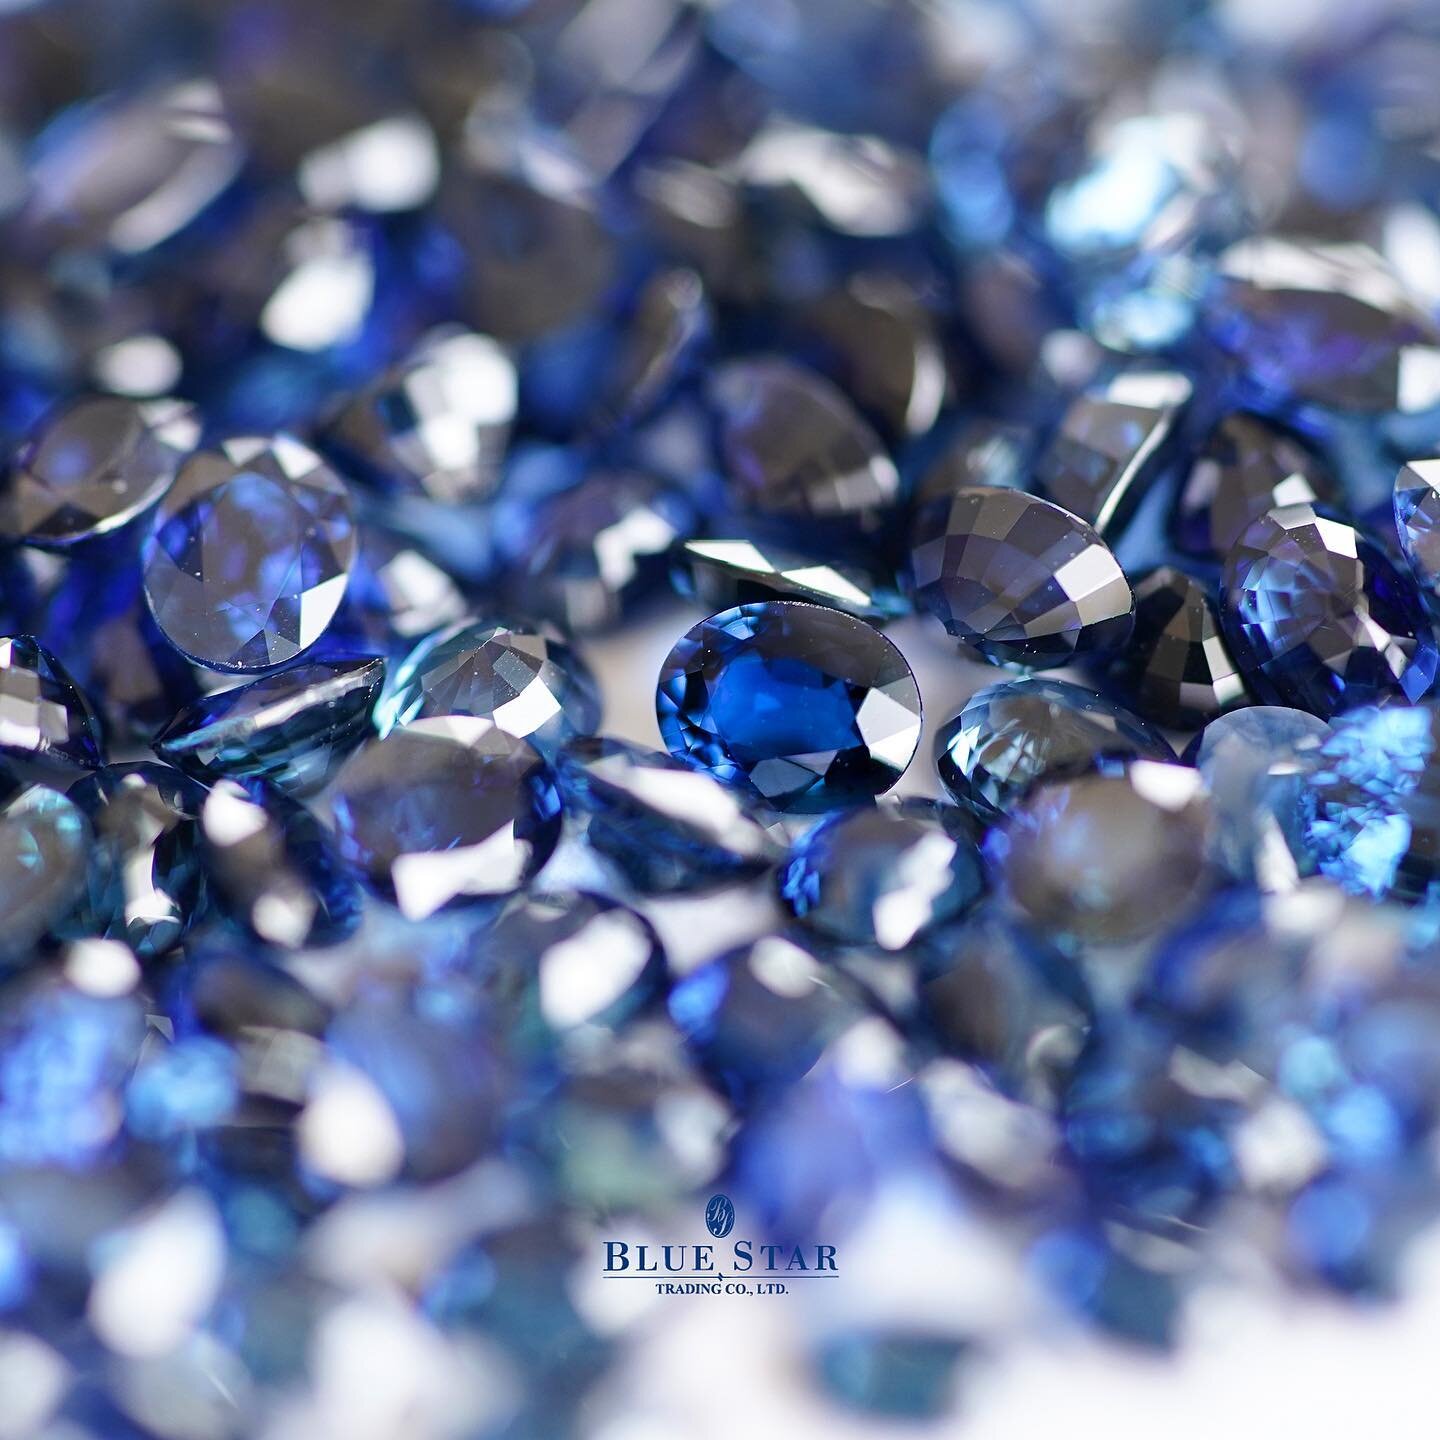 Sapphire blue : the most valuable naturally blue-coloured gemstones in the world.

_______________________________________
Blue Star Trading Co., Ltd - We are sapphire wholesaler / manufacturers for fine jewelry manufacturers and designers. 

Locatio